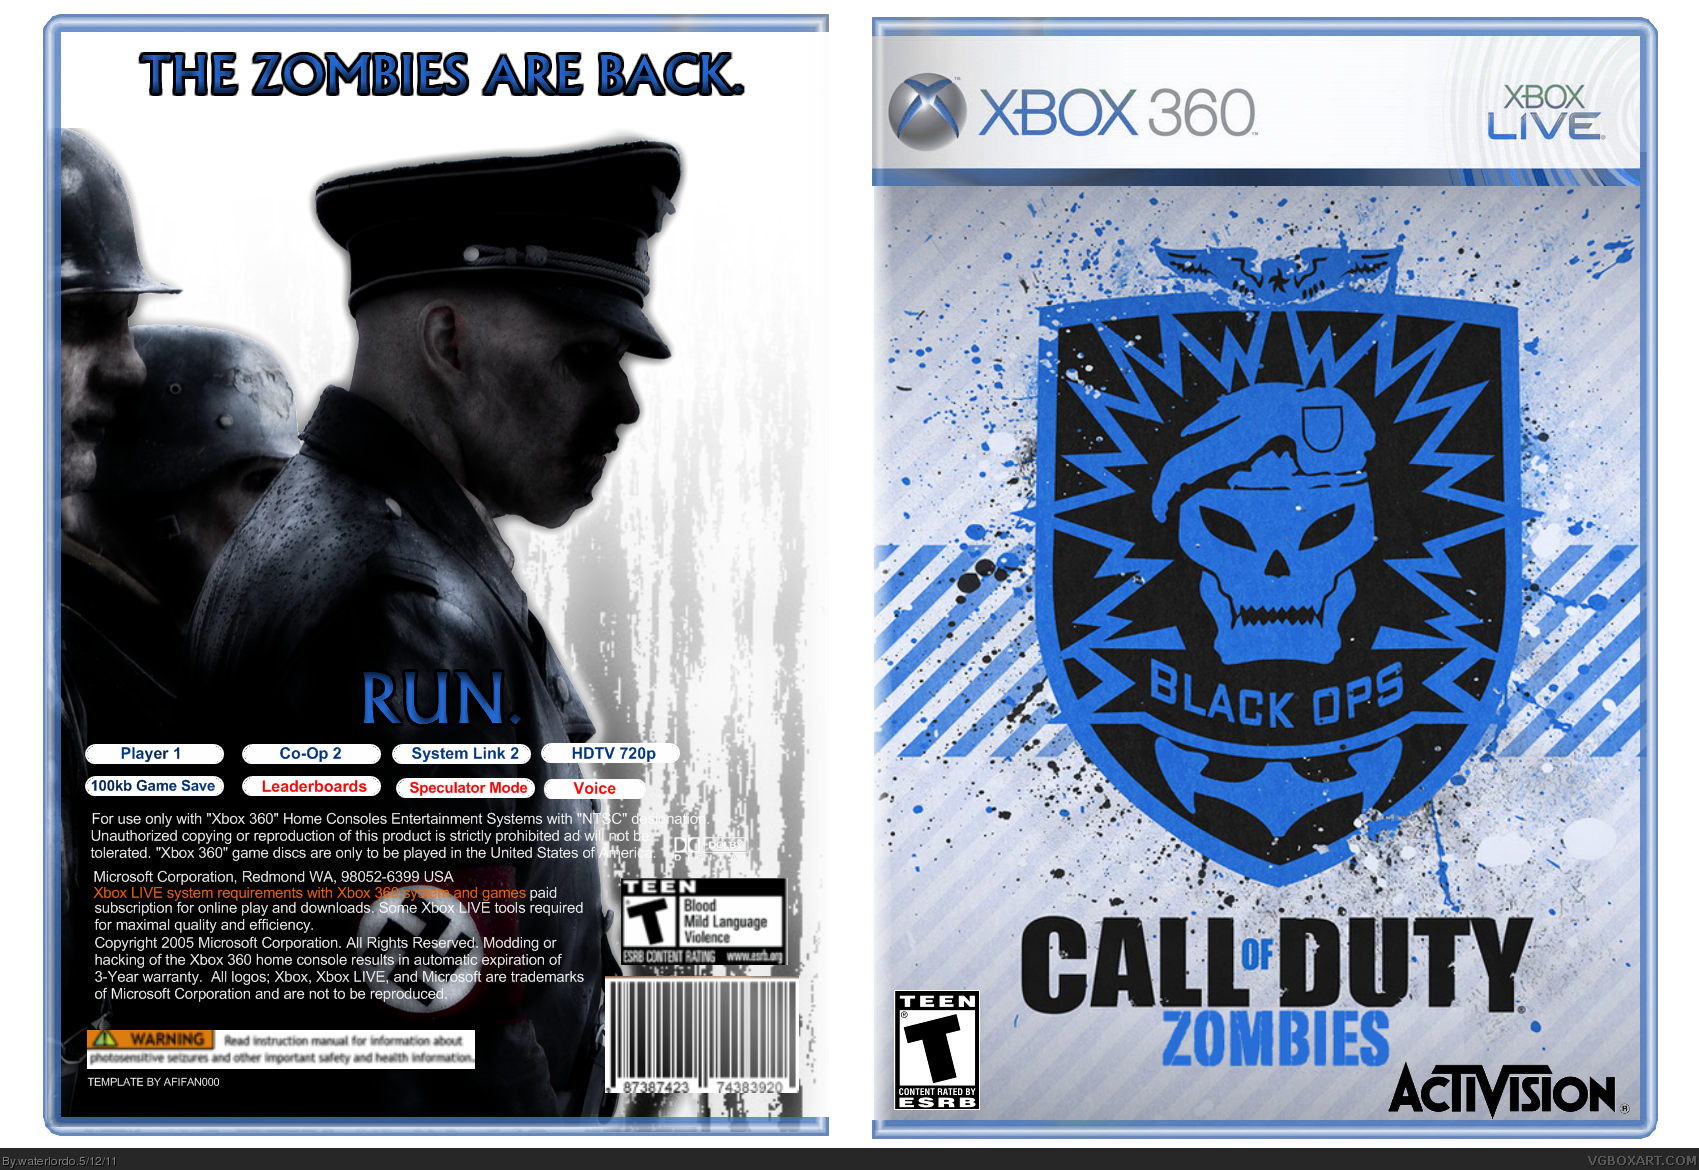 Call of Duty: Zombies box cover